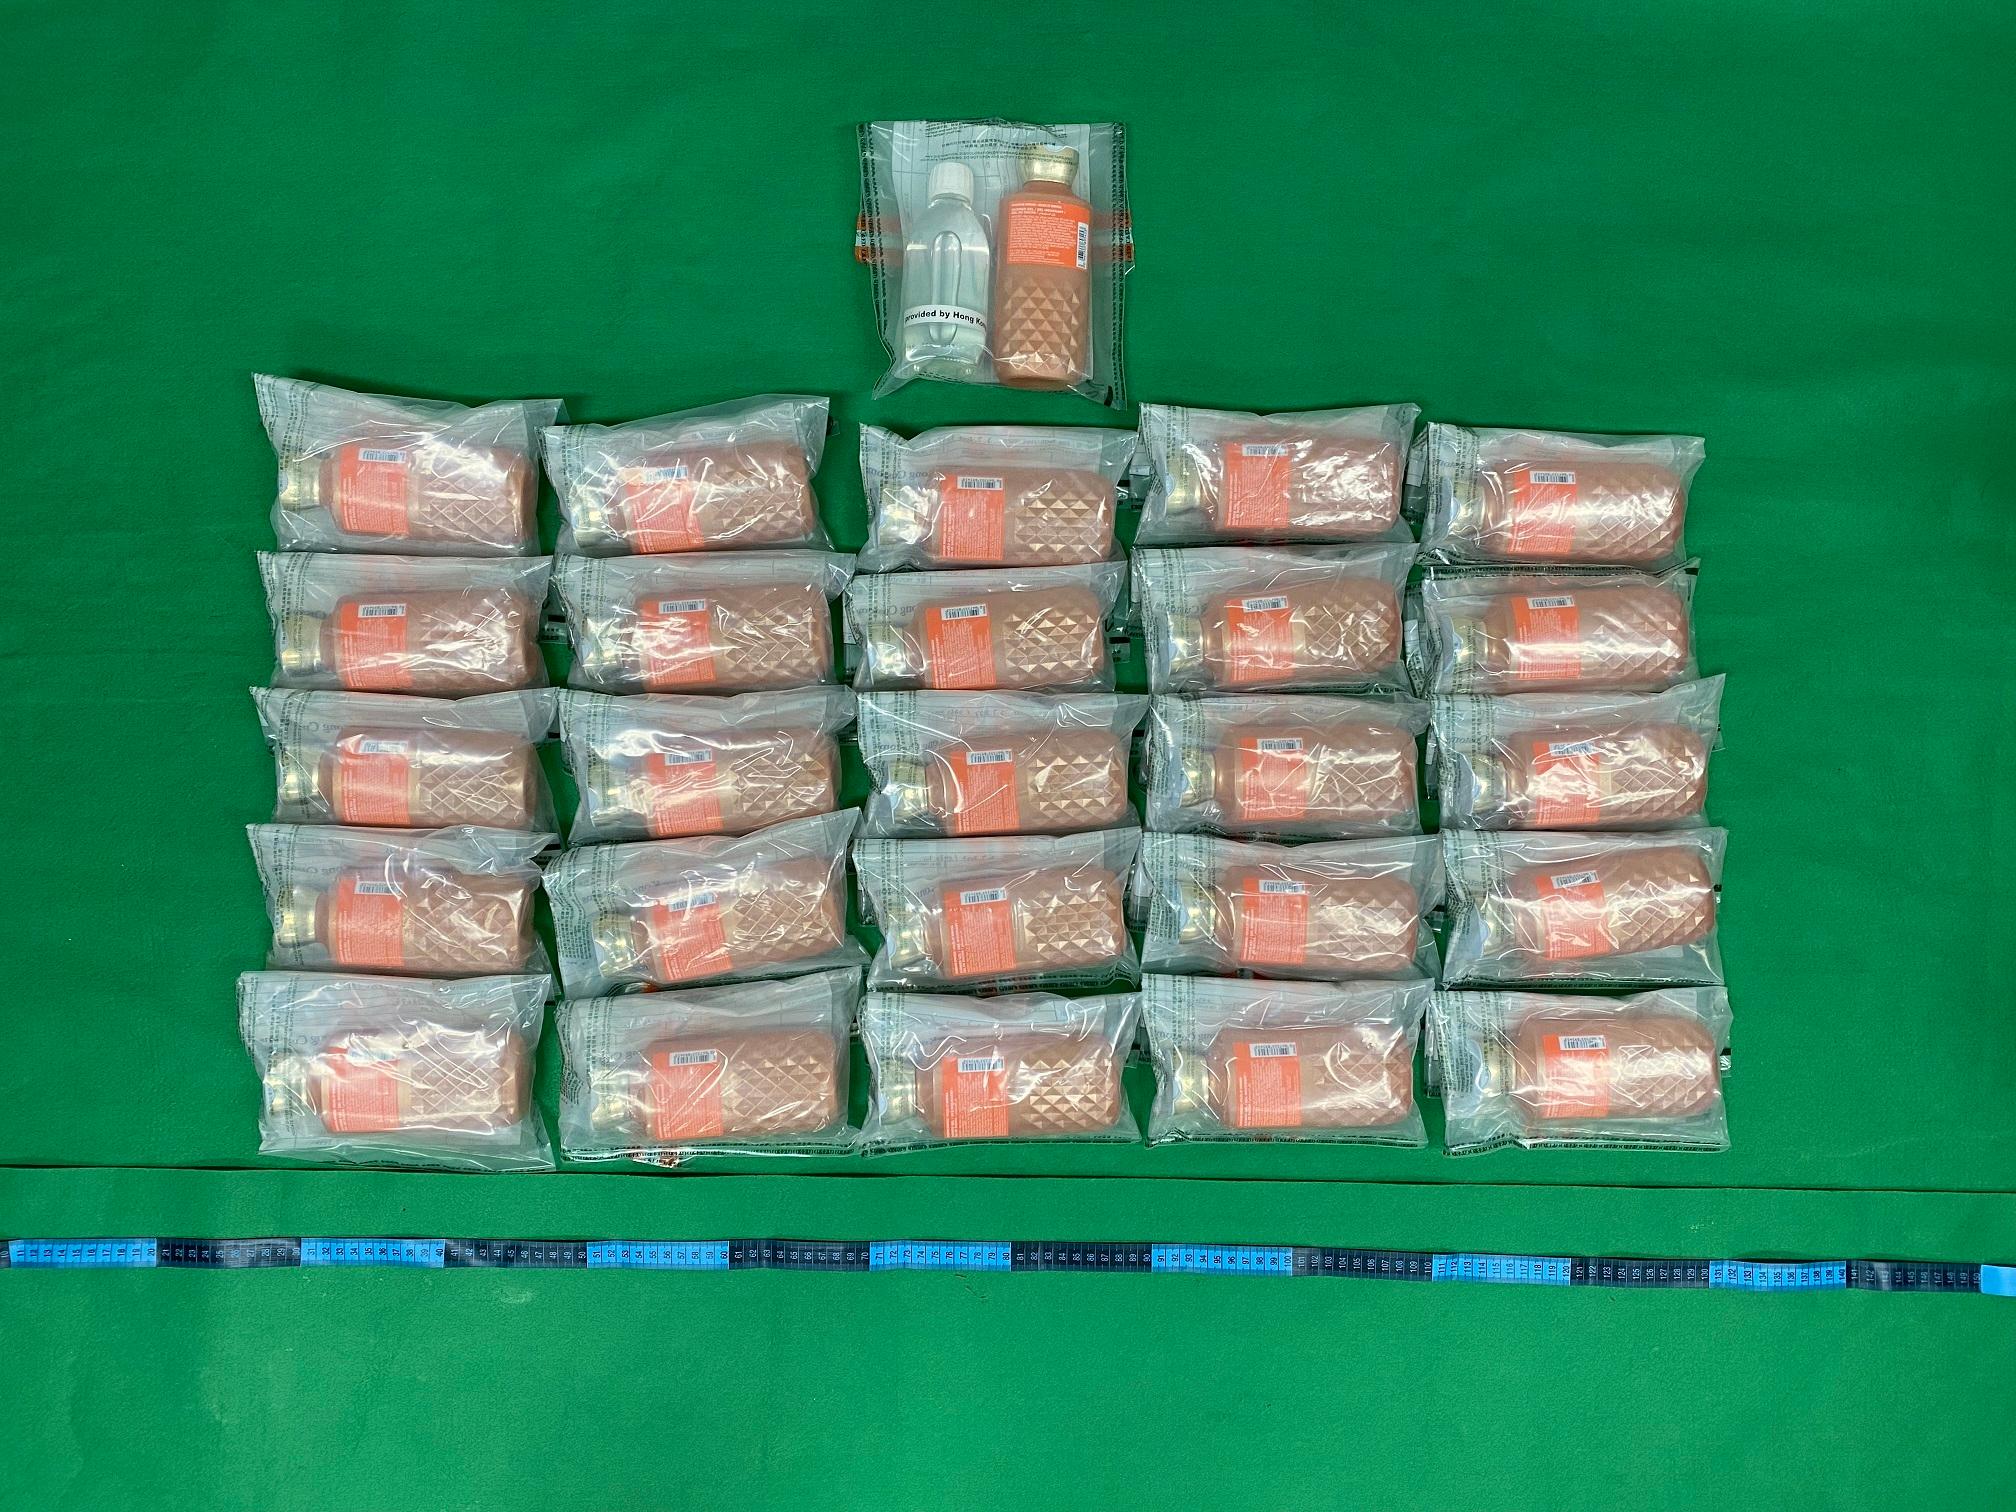 Hong Kong Customs on July 2 seized about 7.8 kilograms of suspected liquid methamphetamine with an estimated market value of about $4.5 million at Hong Kong International Airport. Photo shows the suspected liquid methamphetamine seized.